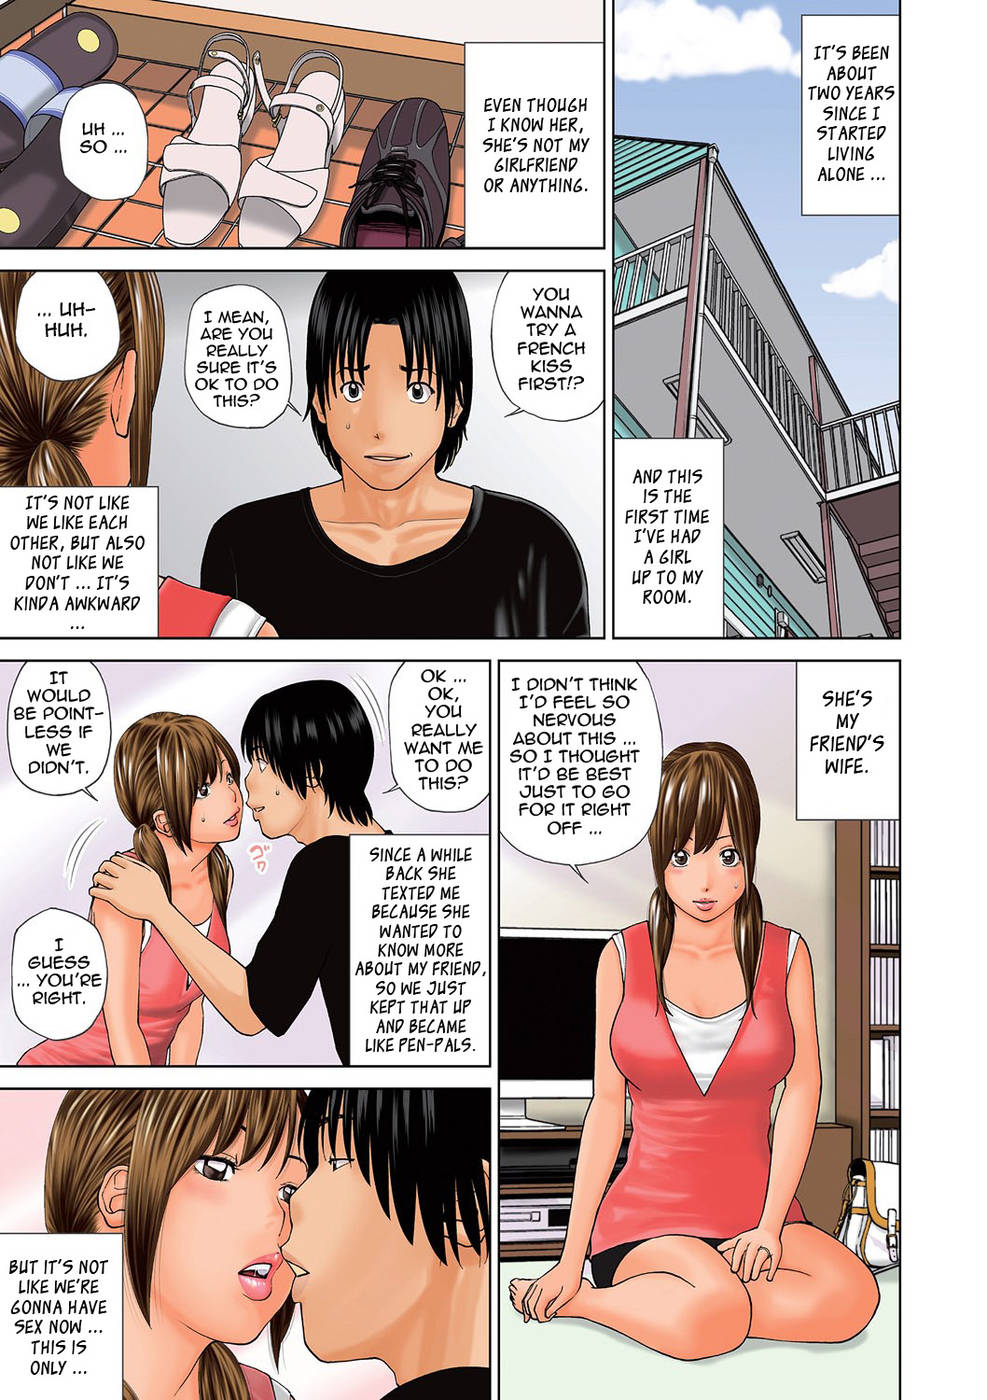 Bokep Jepang Ngtot Ponakn - 33 Year Old Unsatisfied Wife-Chapter 1-Kiss Training-Hentai Manga Hentai  Comic - Page: 2 - Online porn video at mobile